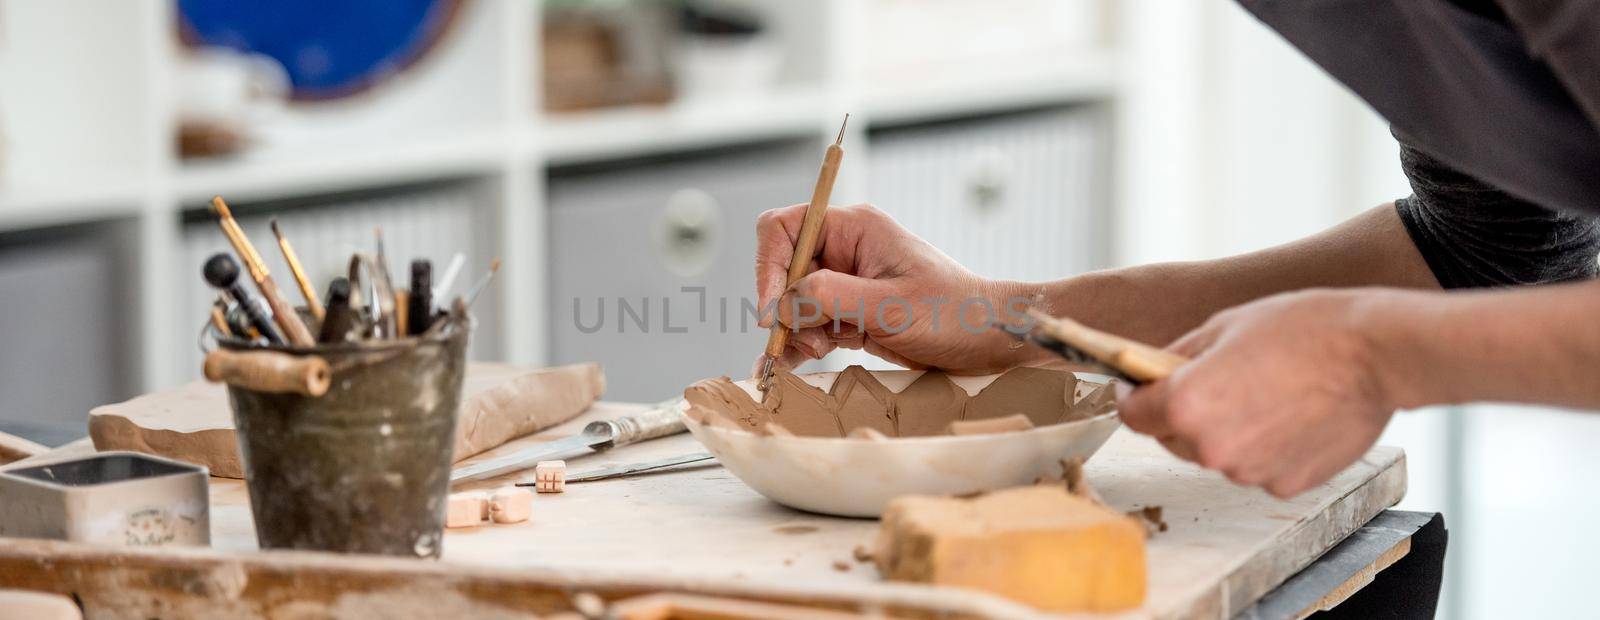 Woman using carving tool on plate by tan4ikk1